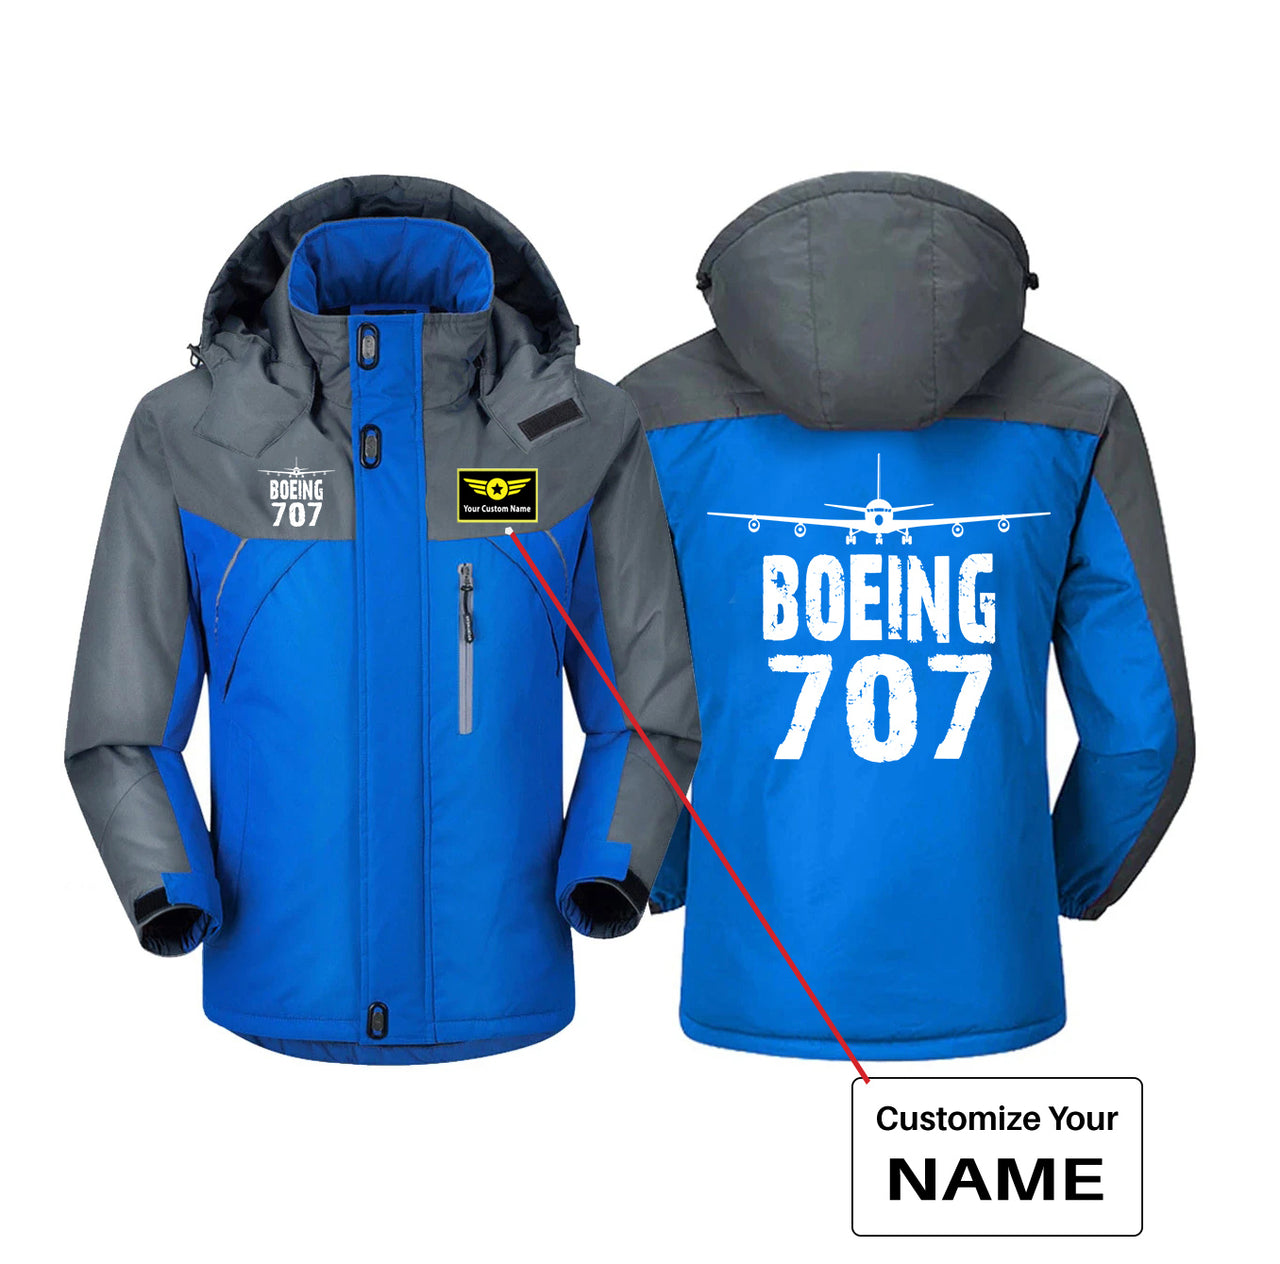 Boeing 707 & Plane Designed Thick Winter Jackets